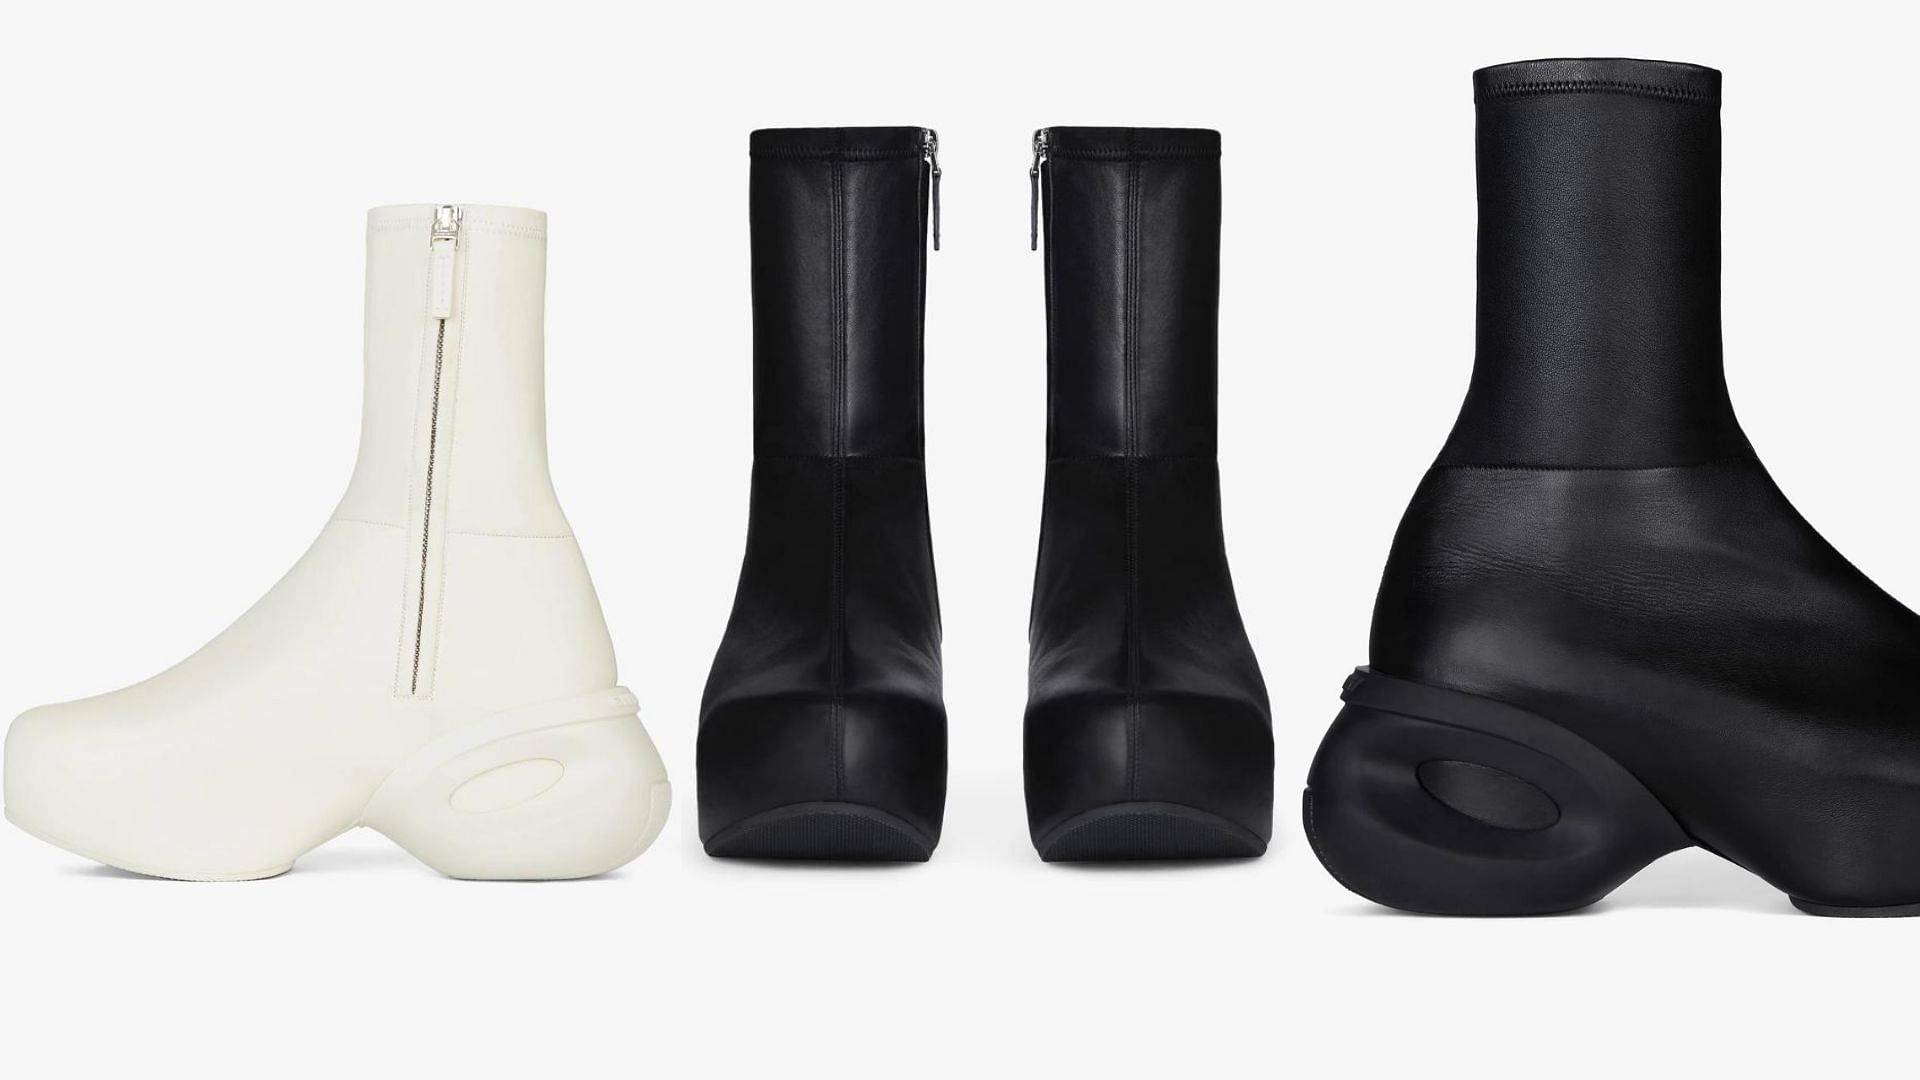 Where to buy Matthew M Williams' Givenchy clogs? Price and more details ...